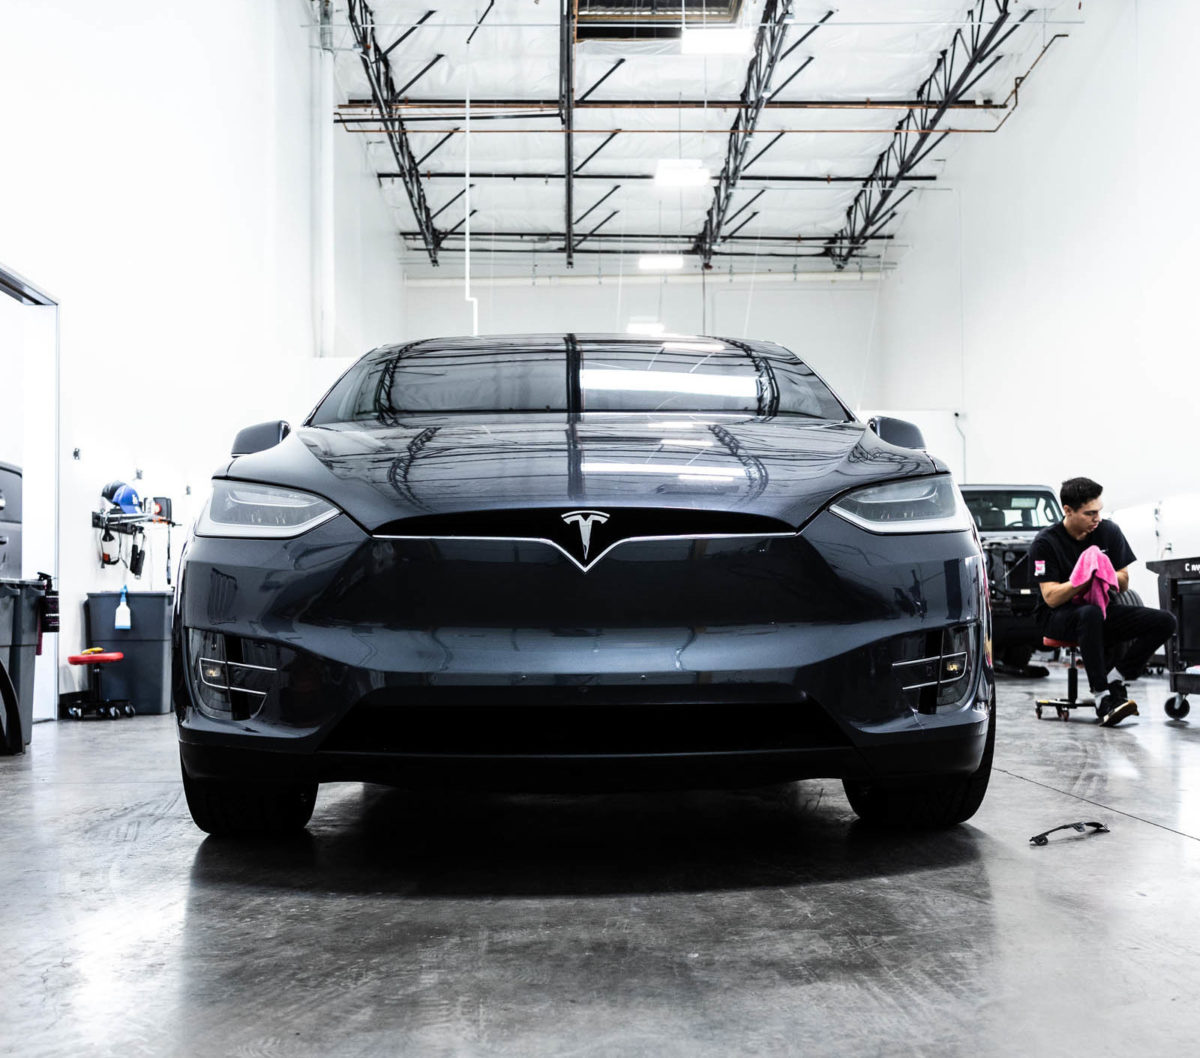 Tesla Owners Protect your investment With Ceramic Coating